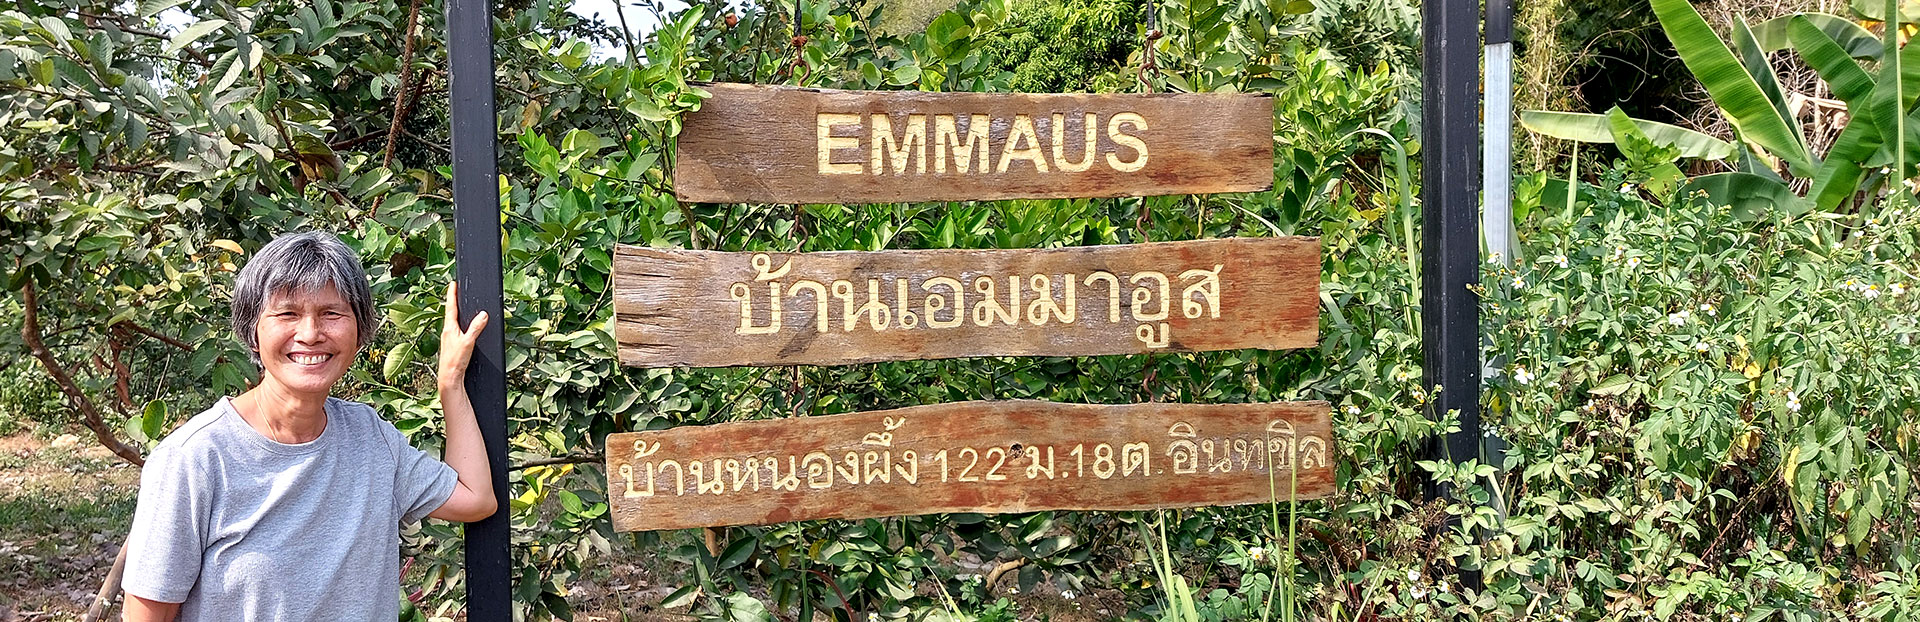 On the road to Emmaus in Thailand… a road to an ecological future